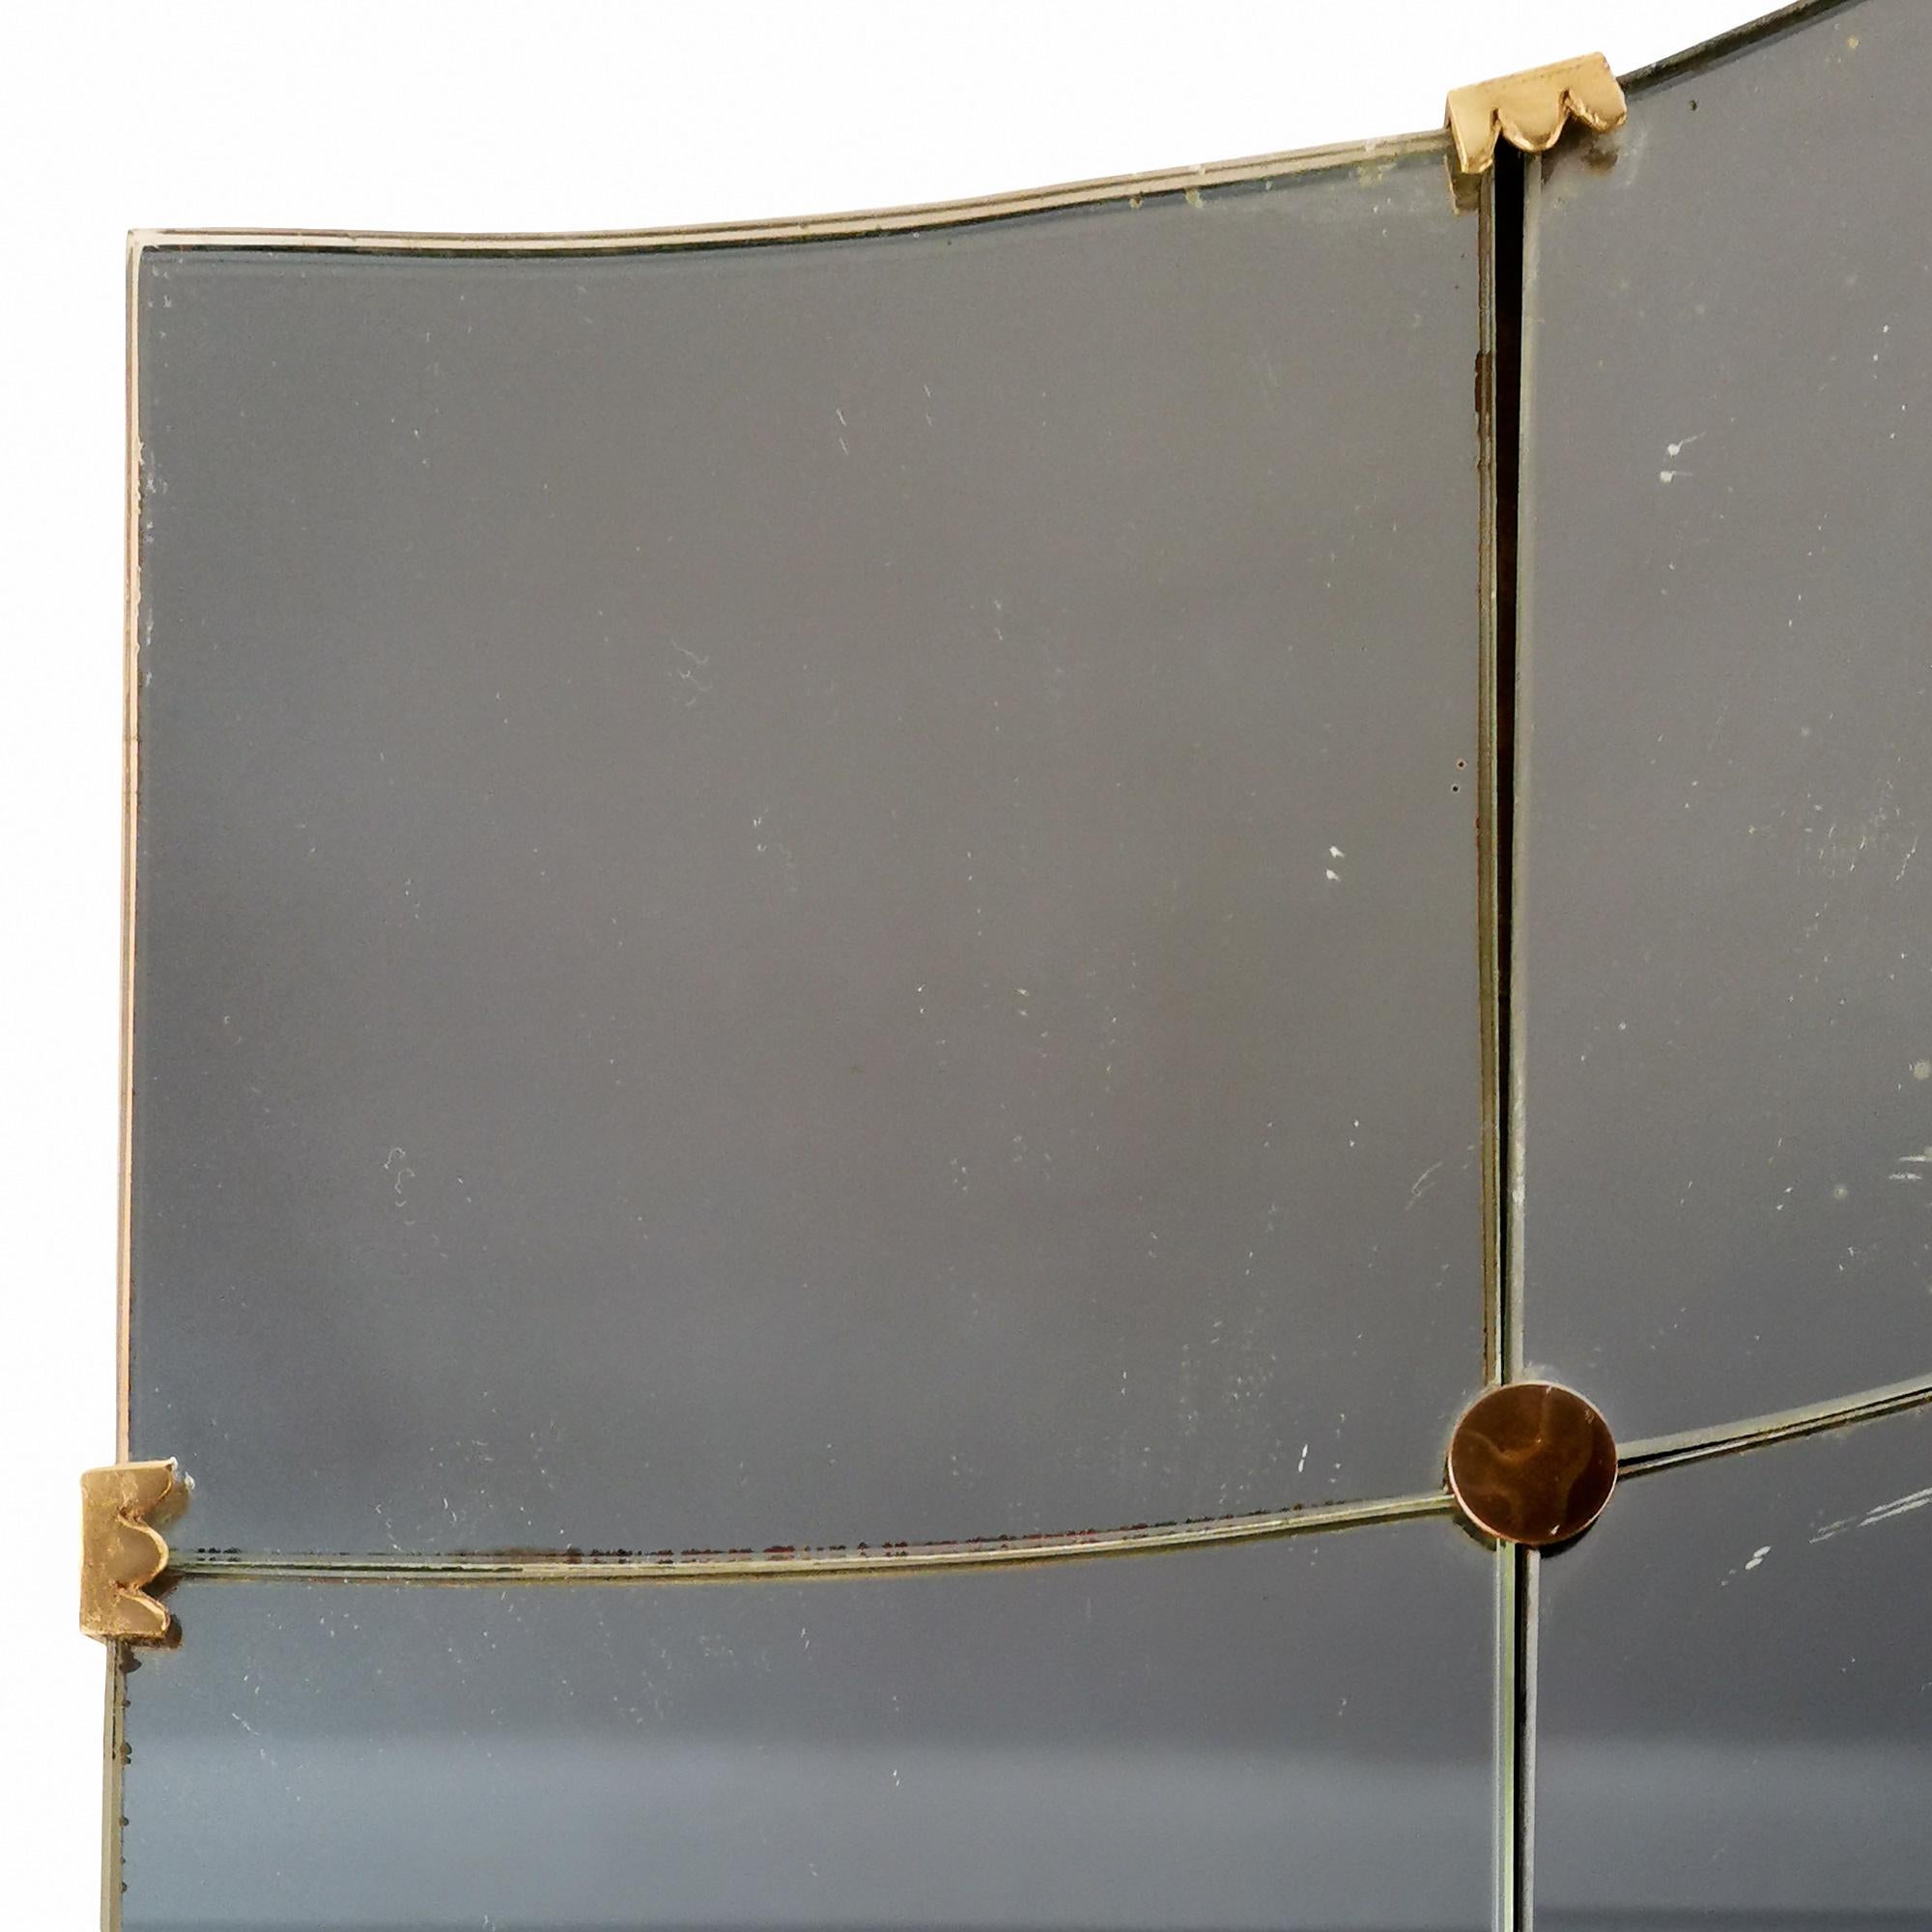 Engraved Large Mid-Century Modern Console Mirror By Pier Luigi Colli - Italy For Sale